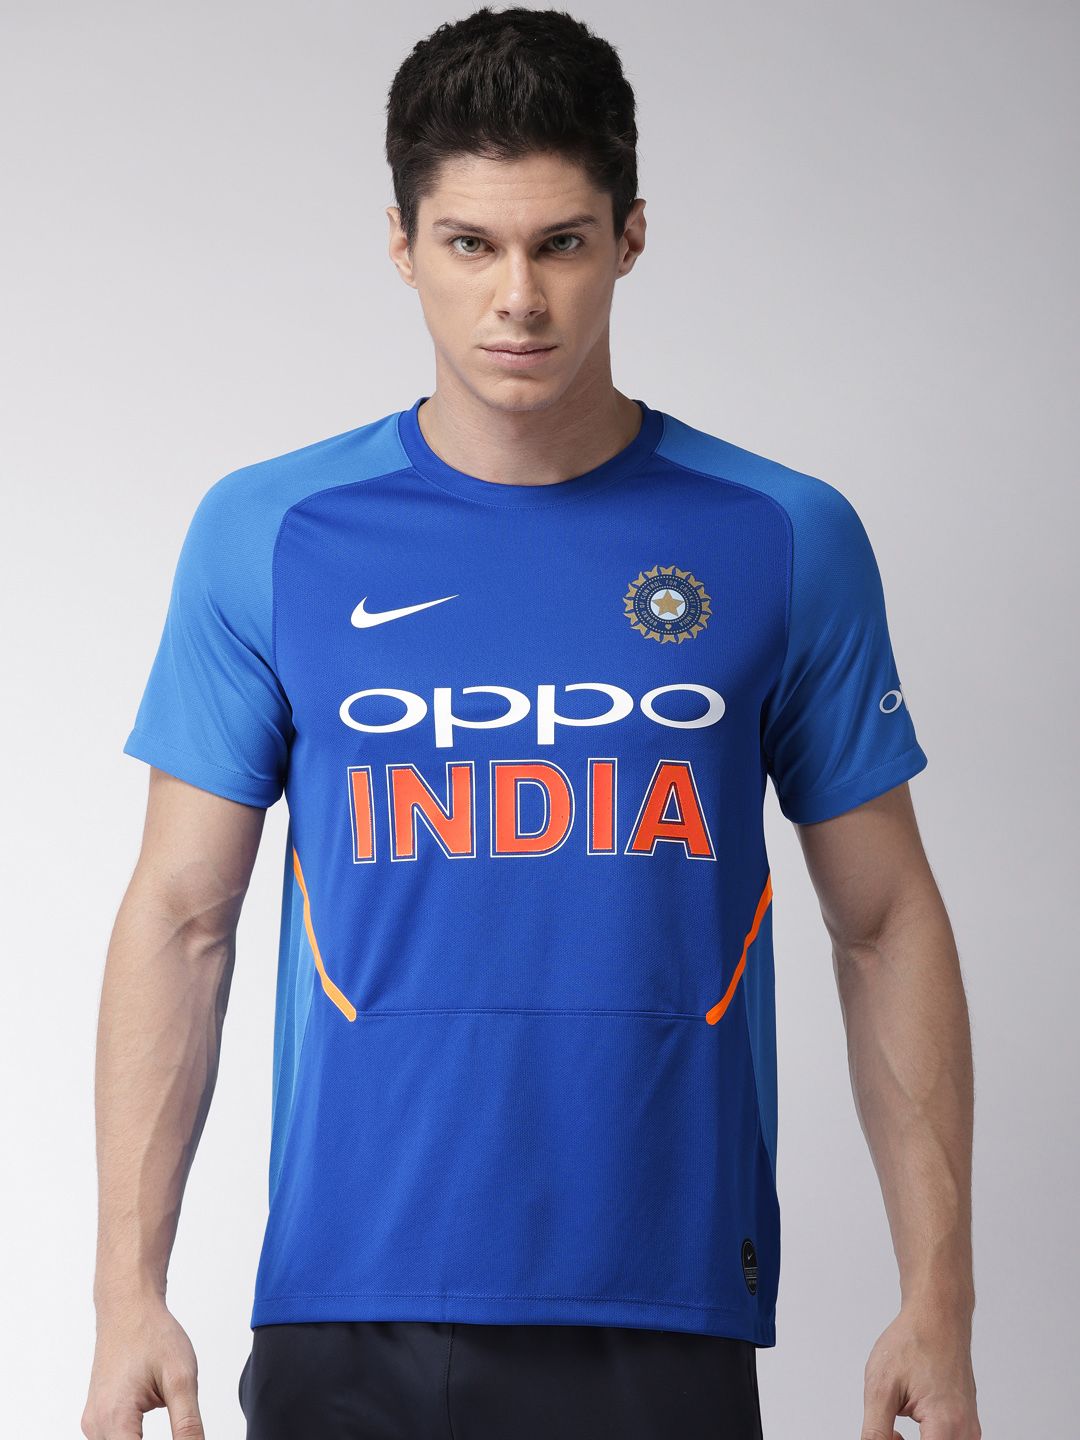 online shopping of indian cricket jersey